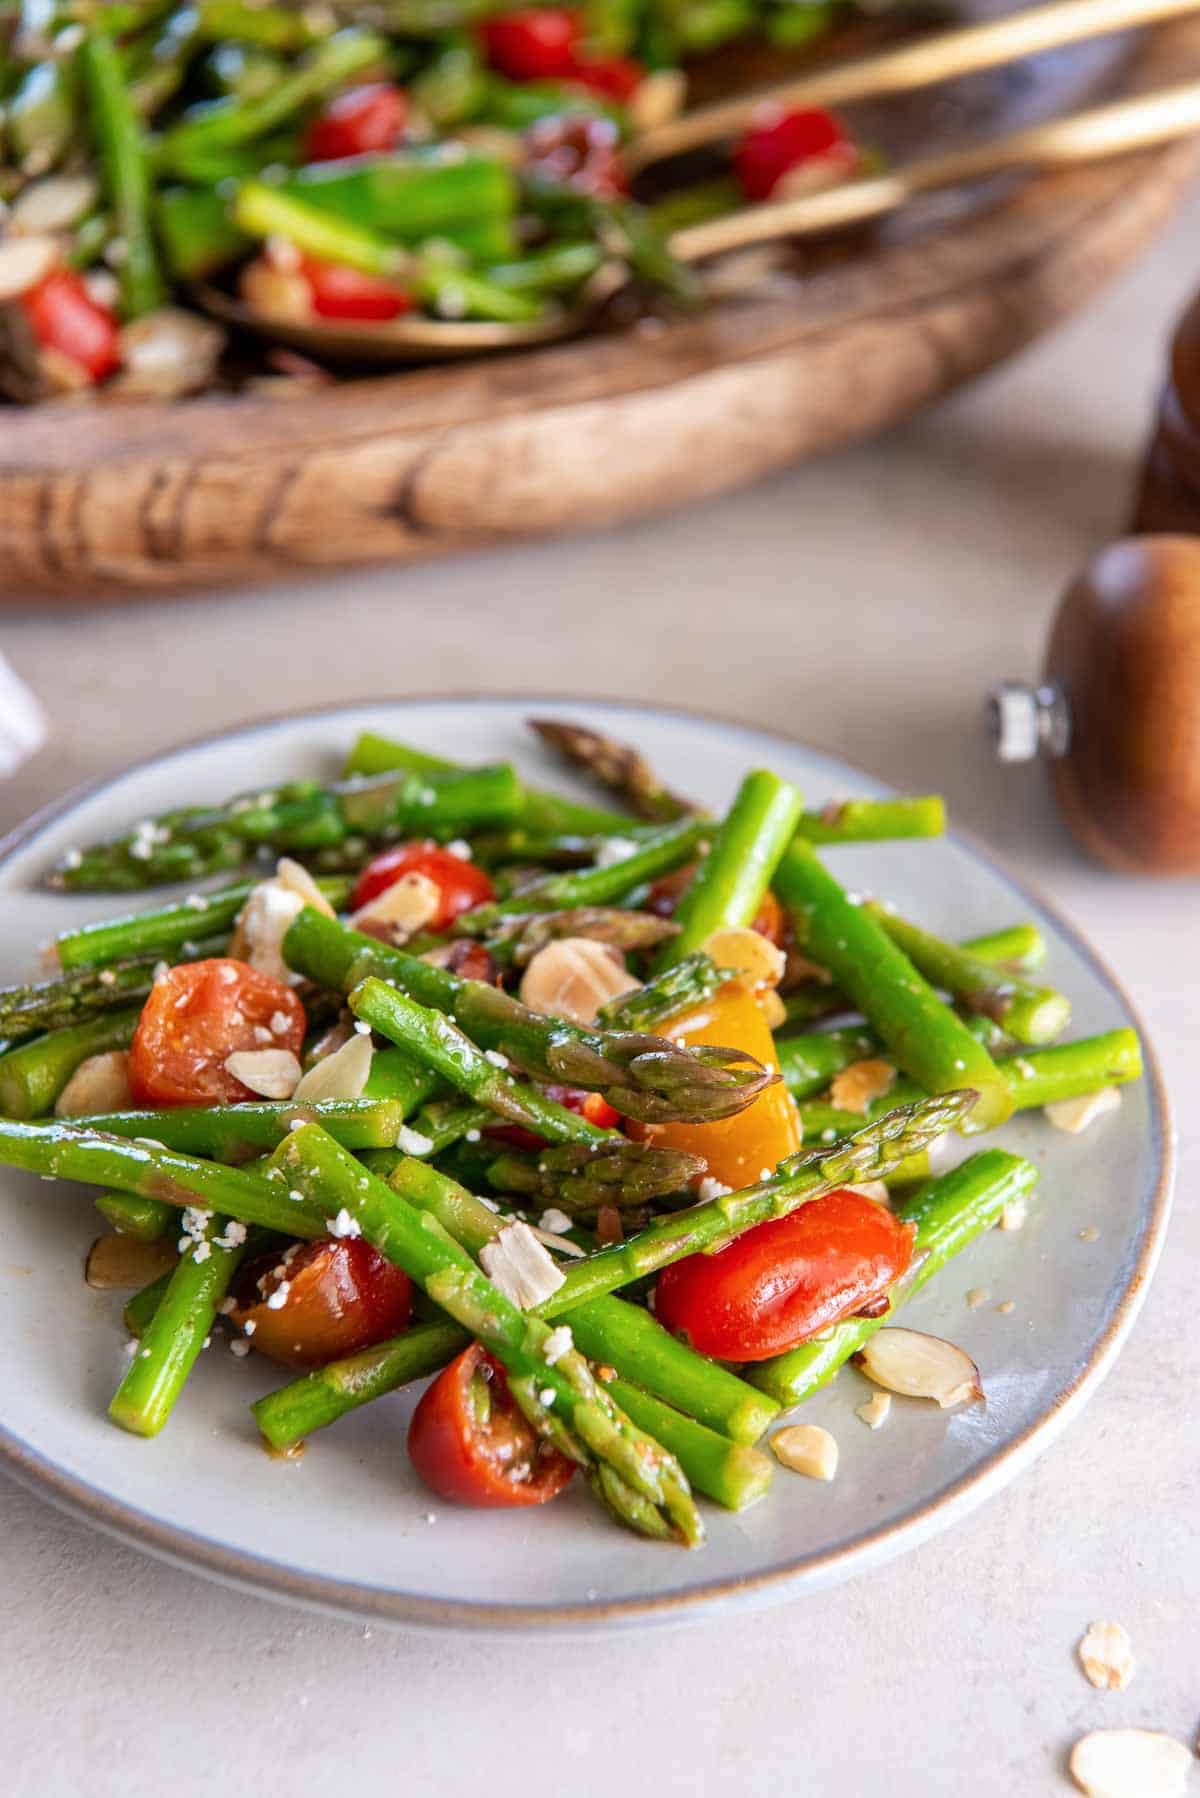 Asparagus salad with cherry tomatoes, almonds, and feta on a small white plate.